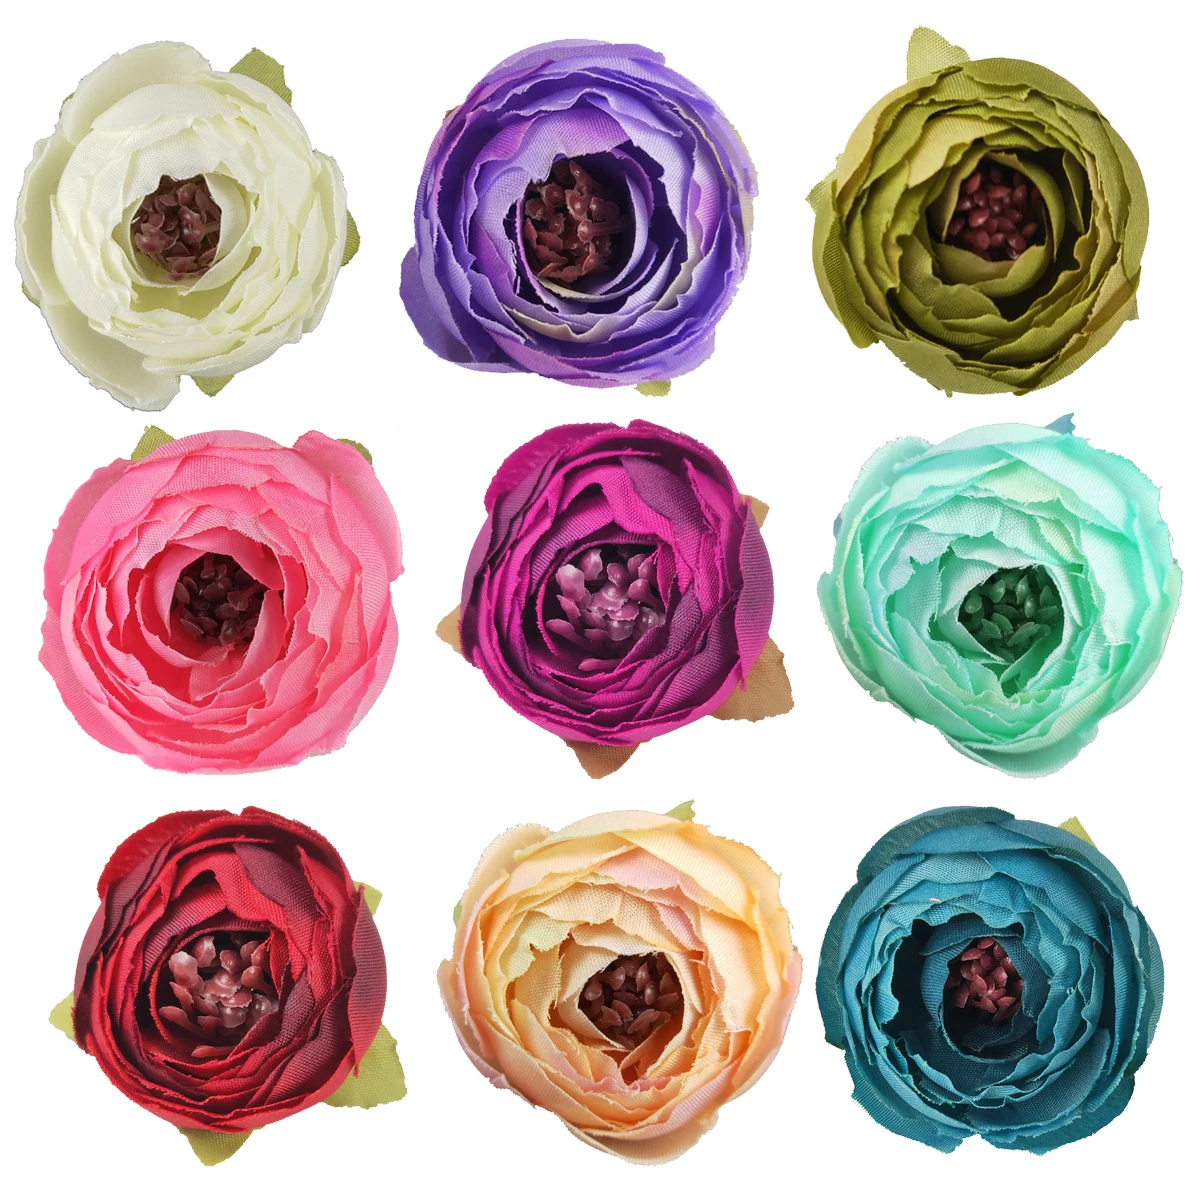 

10Pcs Artificial Flowers 3.5CM Bud Silk Camellia Head For Wedding Party Home Garden Decorations DIY Craft Wreath Christmas Gifts